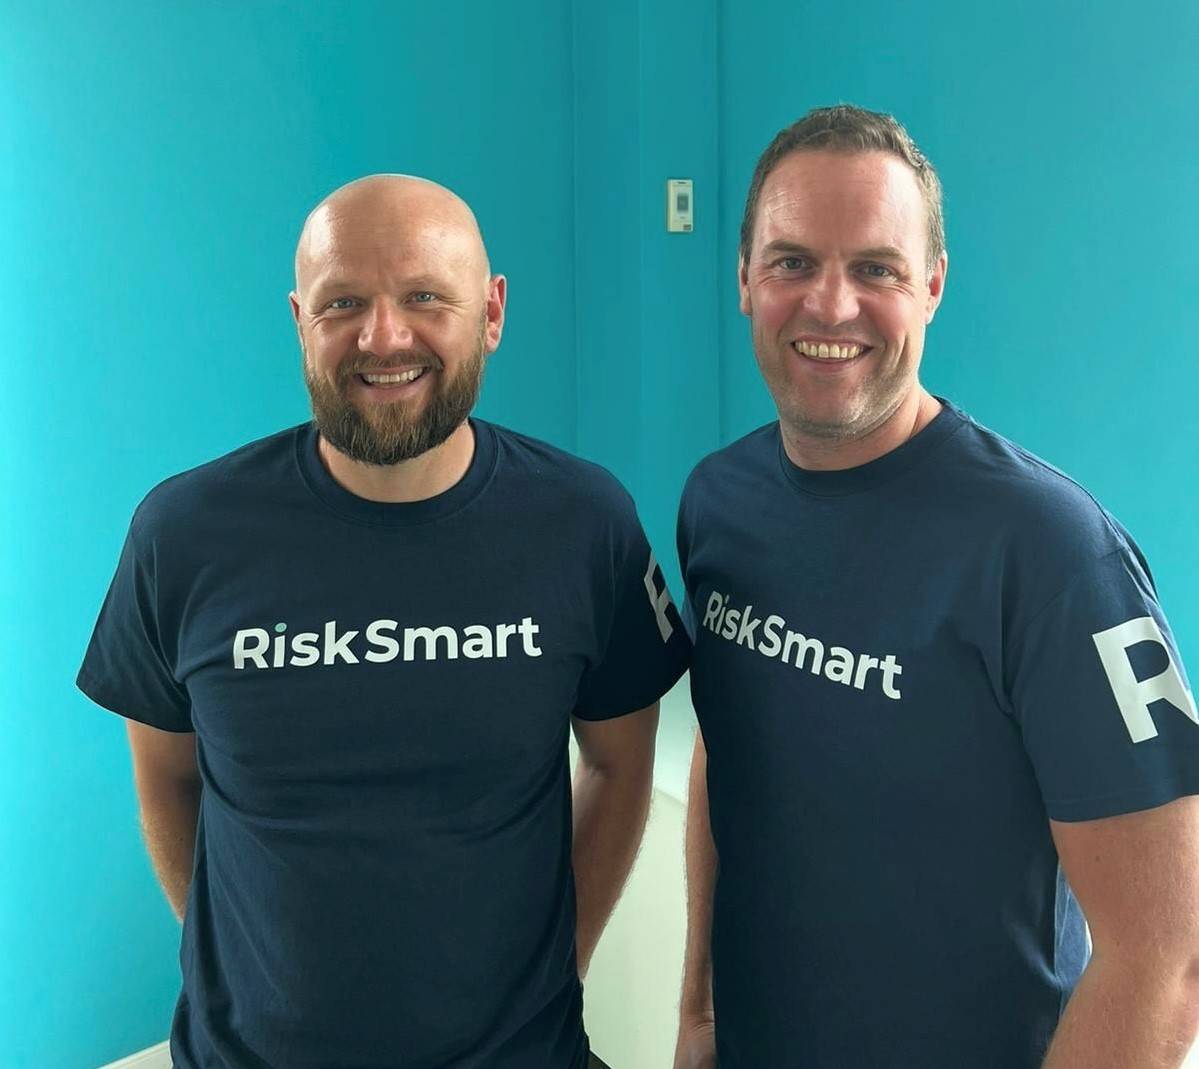 NPIF Maven Equity Finance invests £250,000 in RegTech firm Risk Smart